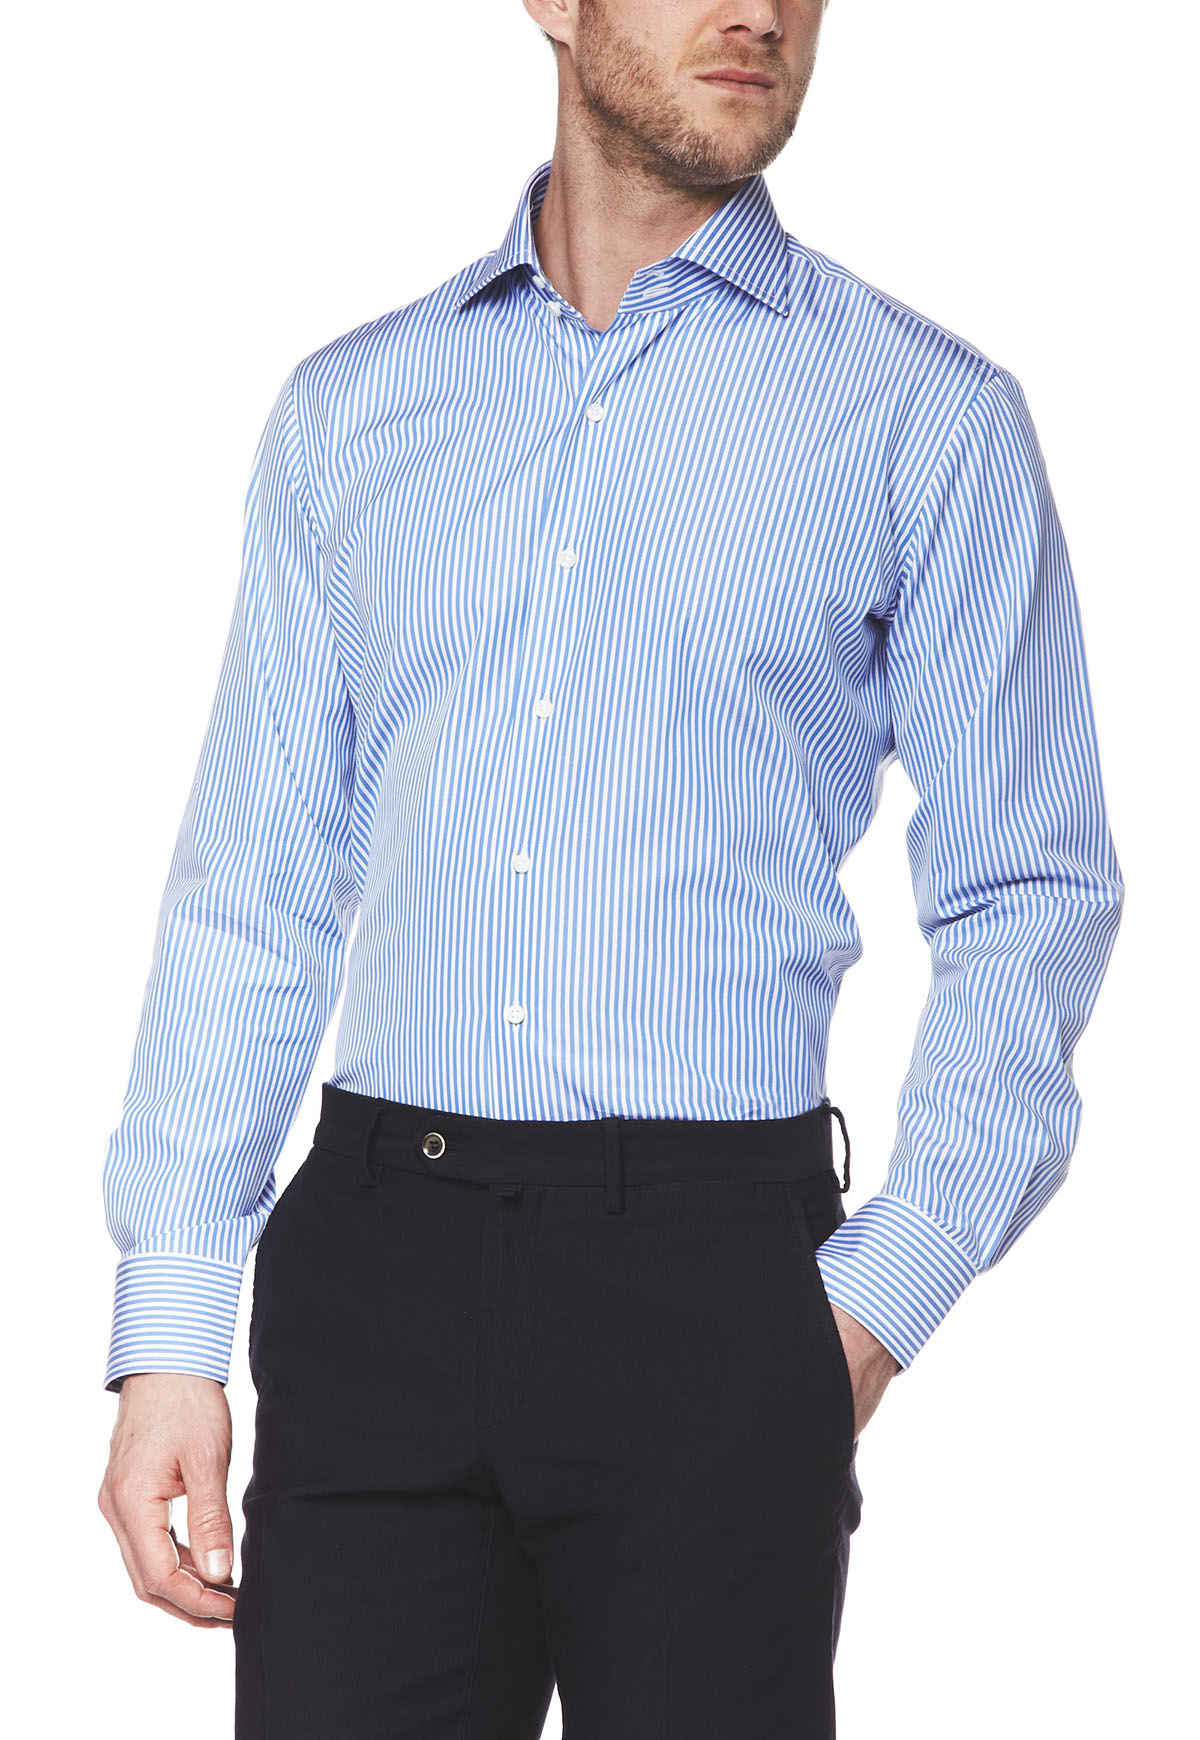 chemise-homme-manches-longues-coupe-ajustee-col-napoli-popeline-bleu-moyen-raye-coton-face-alain-figaret-an0589206785.jpg